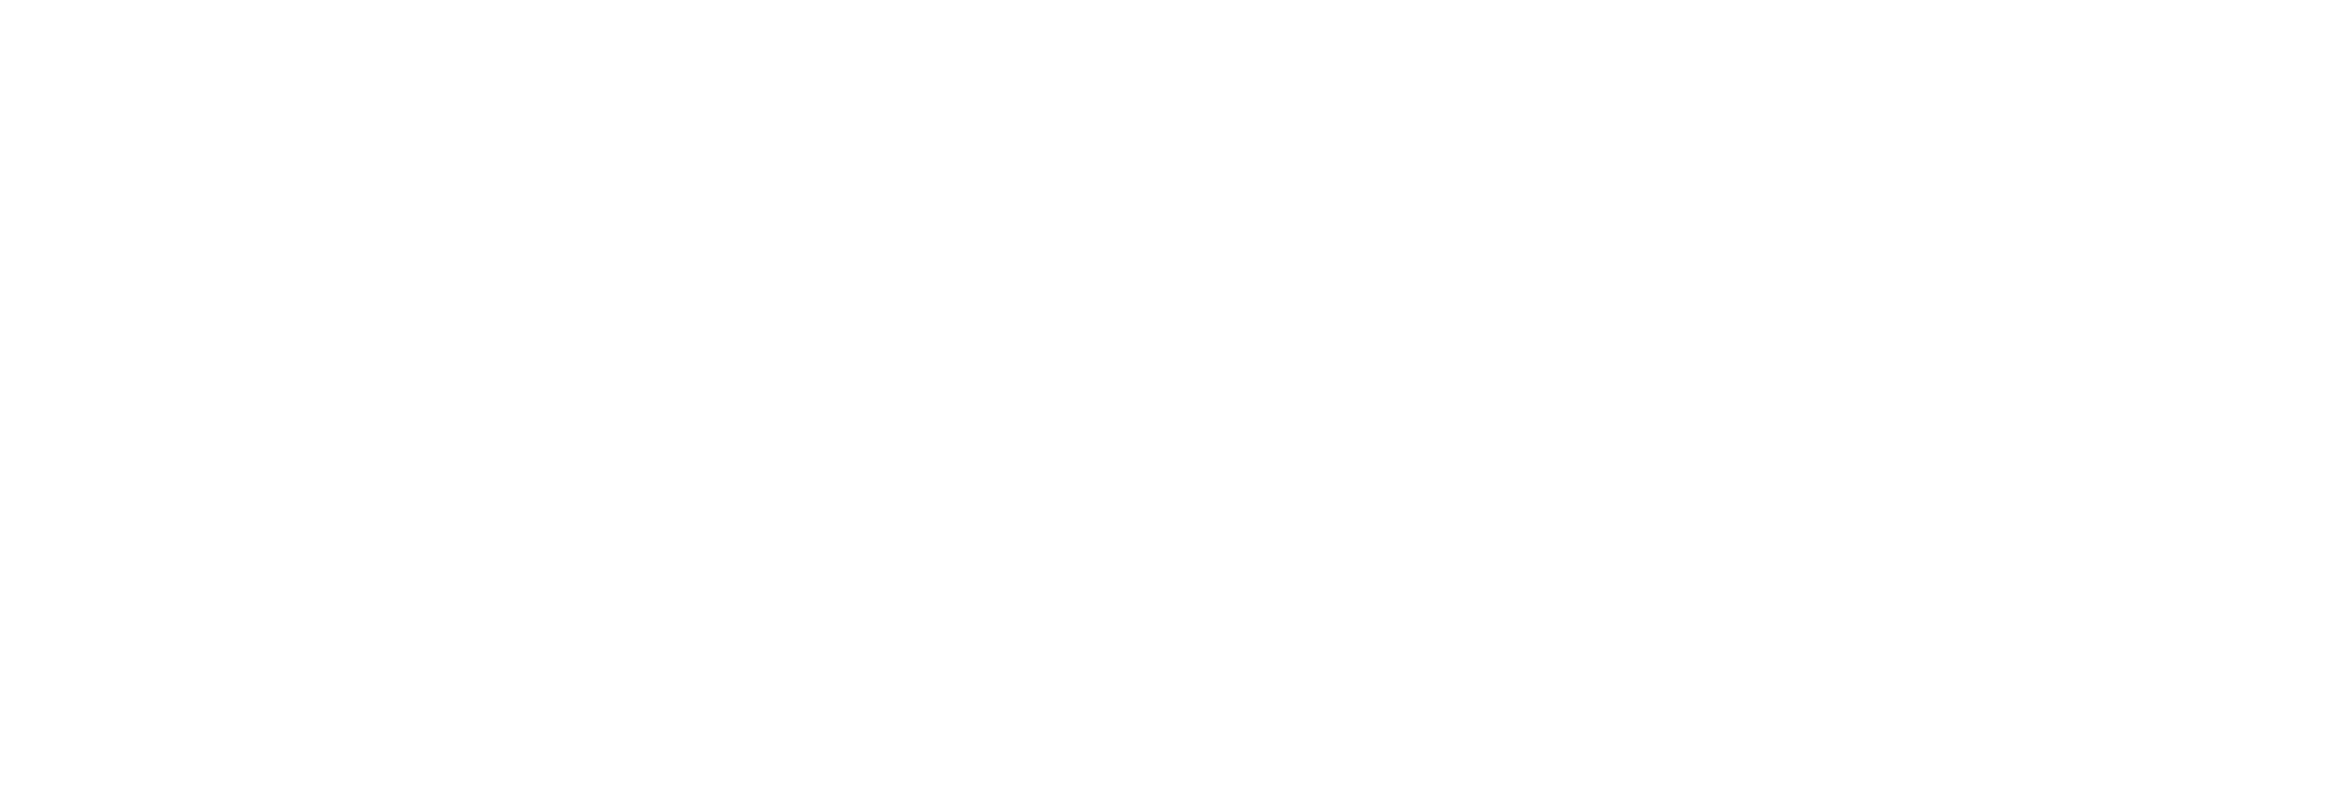 Audience_Connected